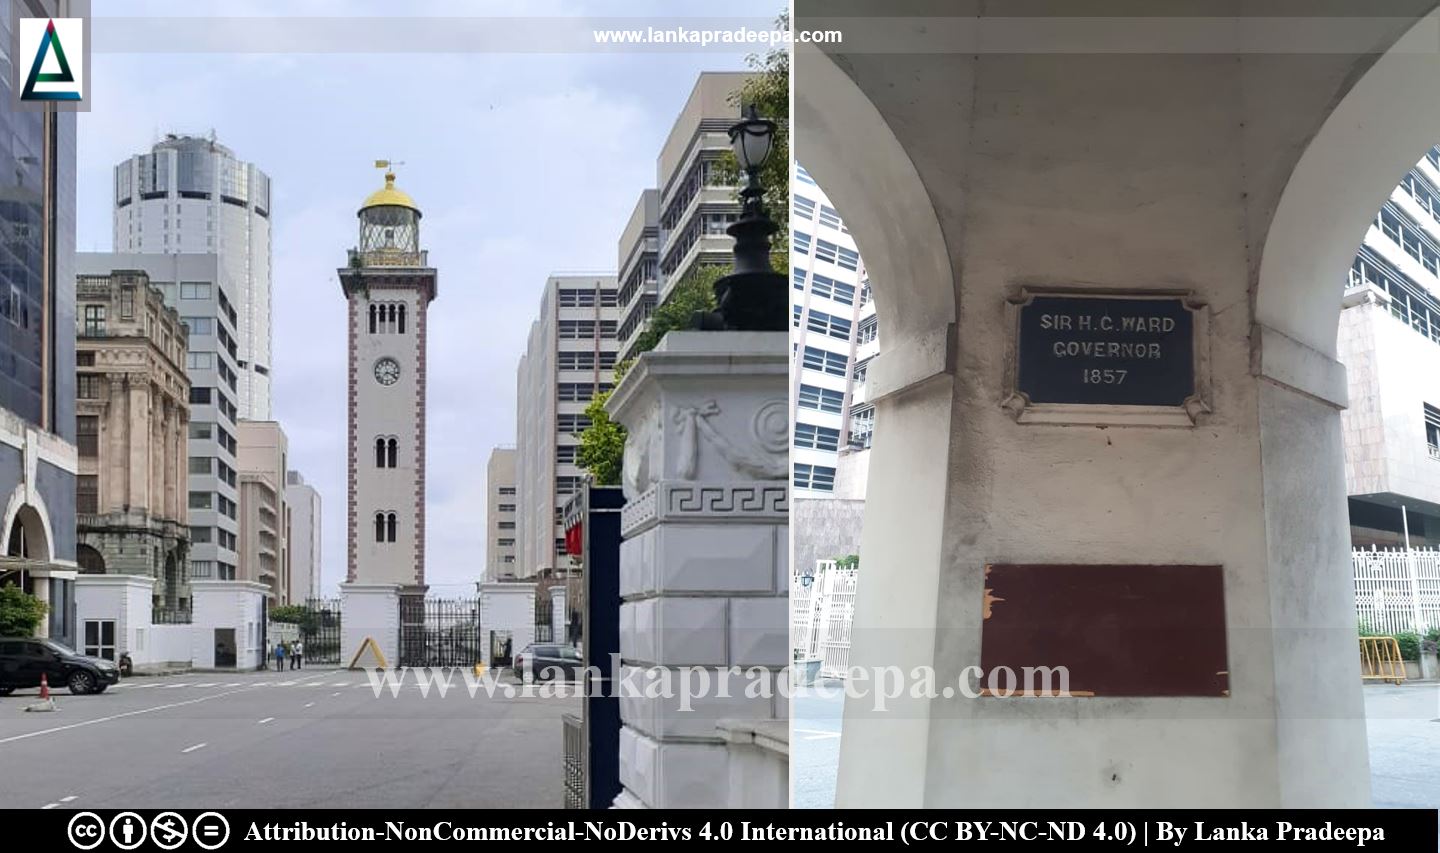 Old Lighthouse and Clock Tower (Colombo)